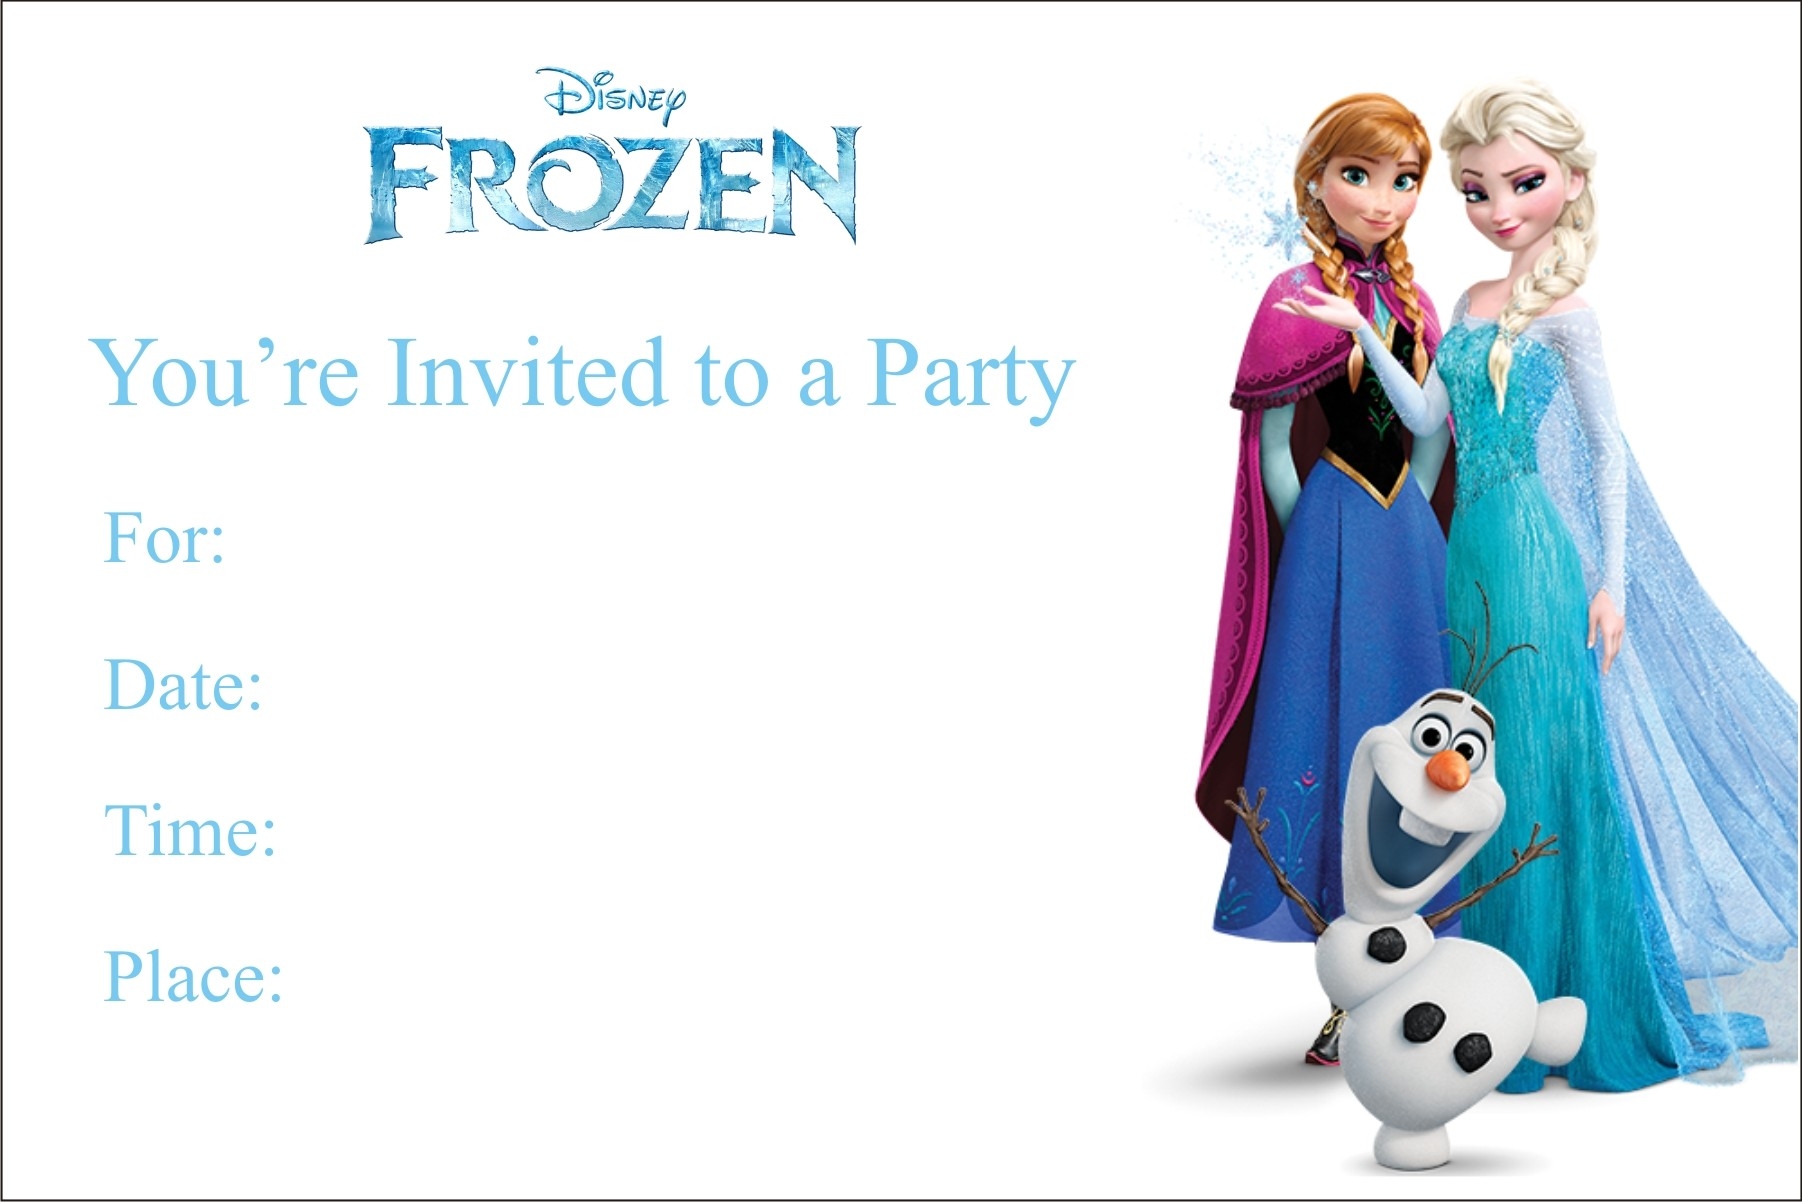 Frozen Free Printable Birthday Party Invitation Personalized Party Invites - Free Printable Birthday Invitations With Pictures